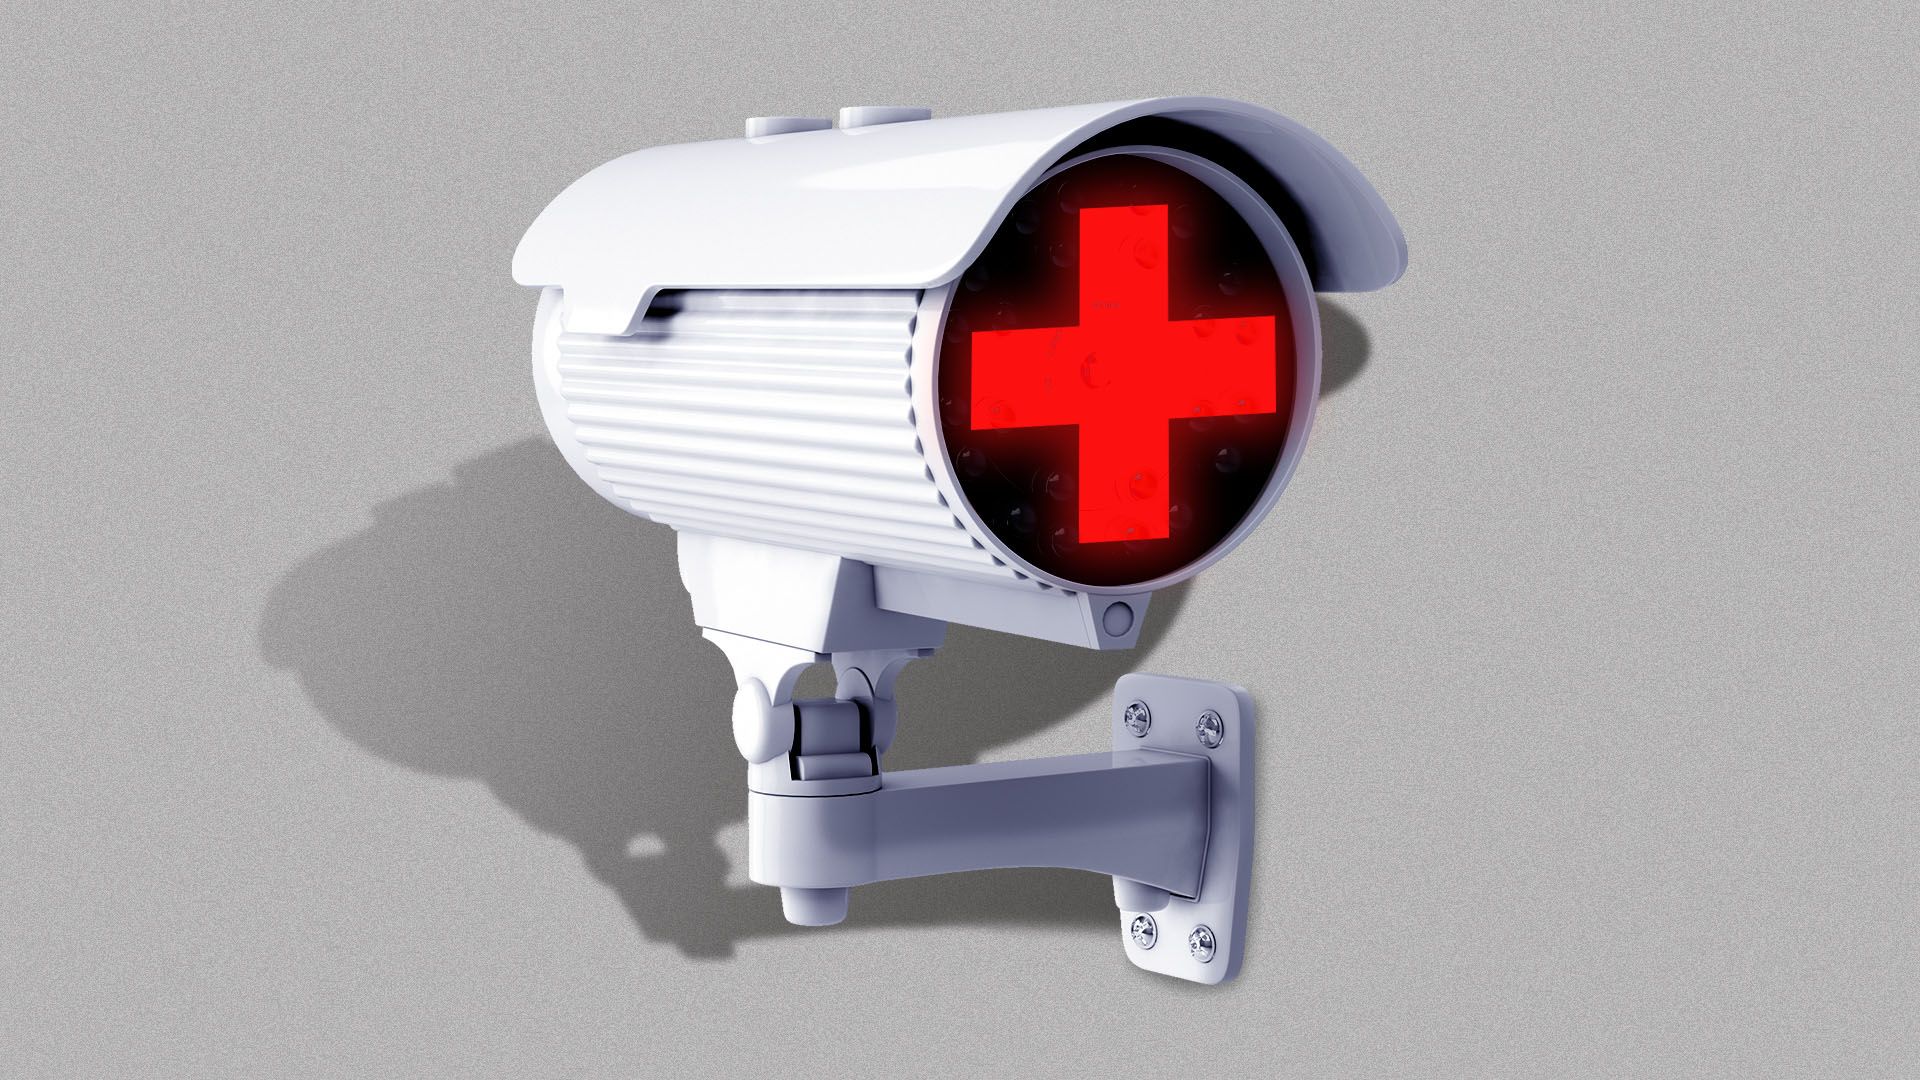 lllustration of a security camera with a red cross over the lens.